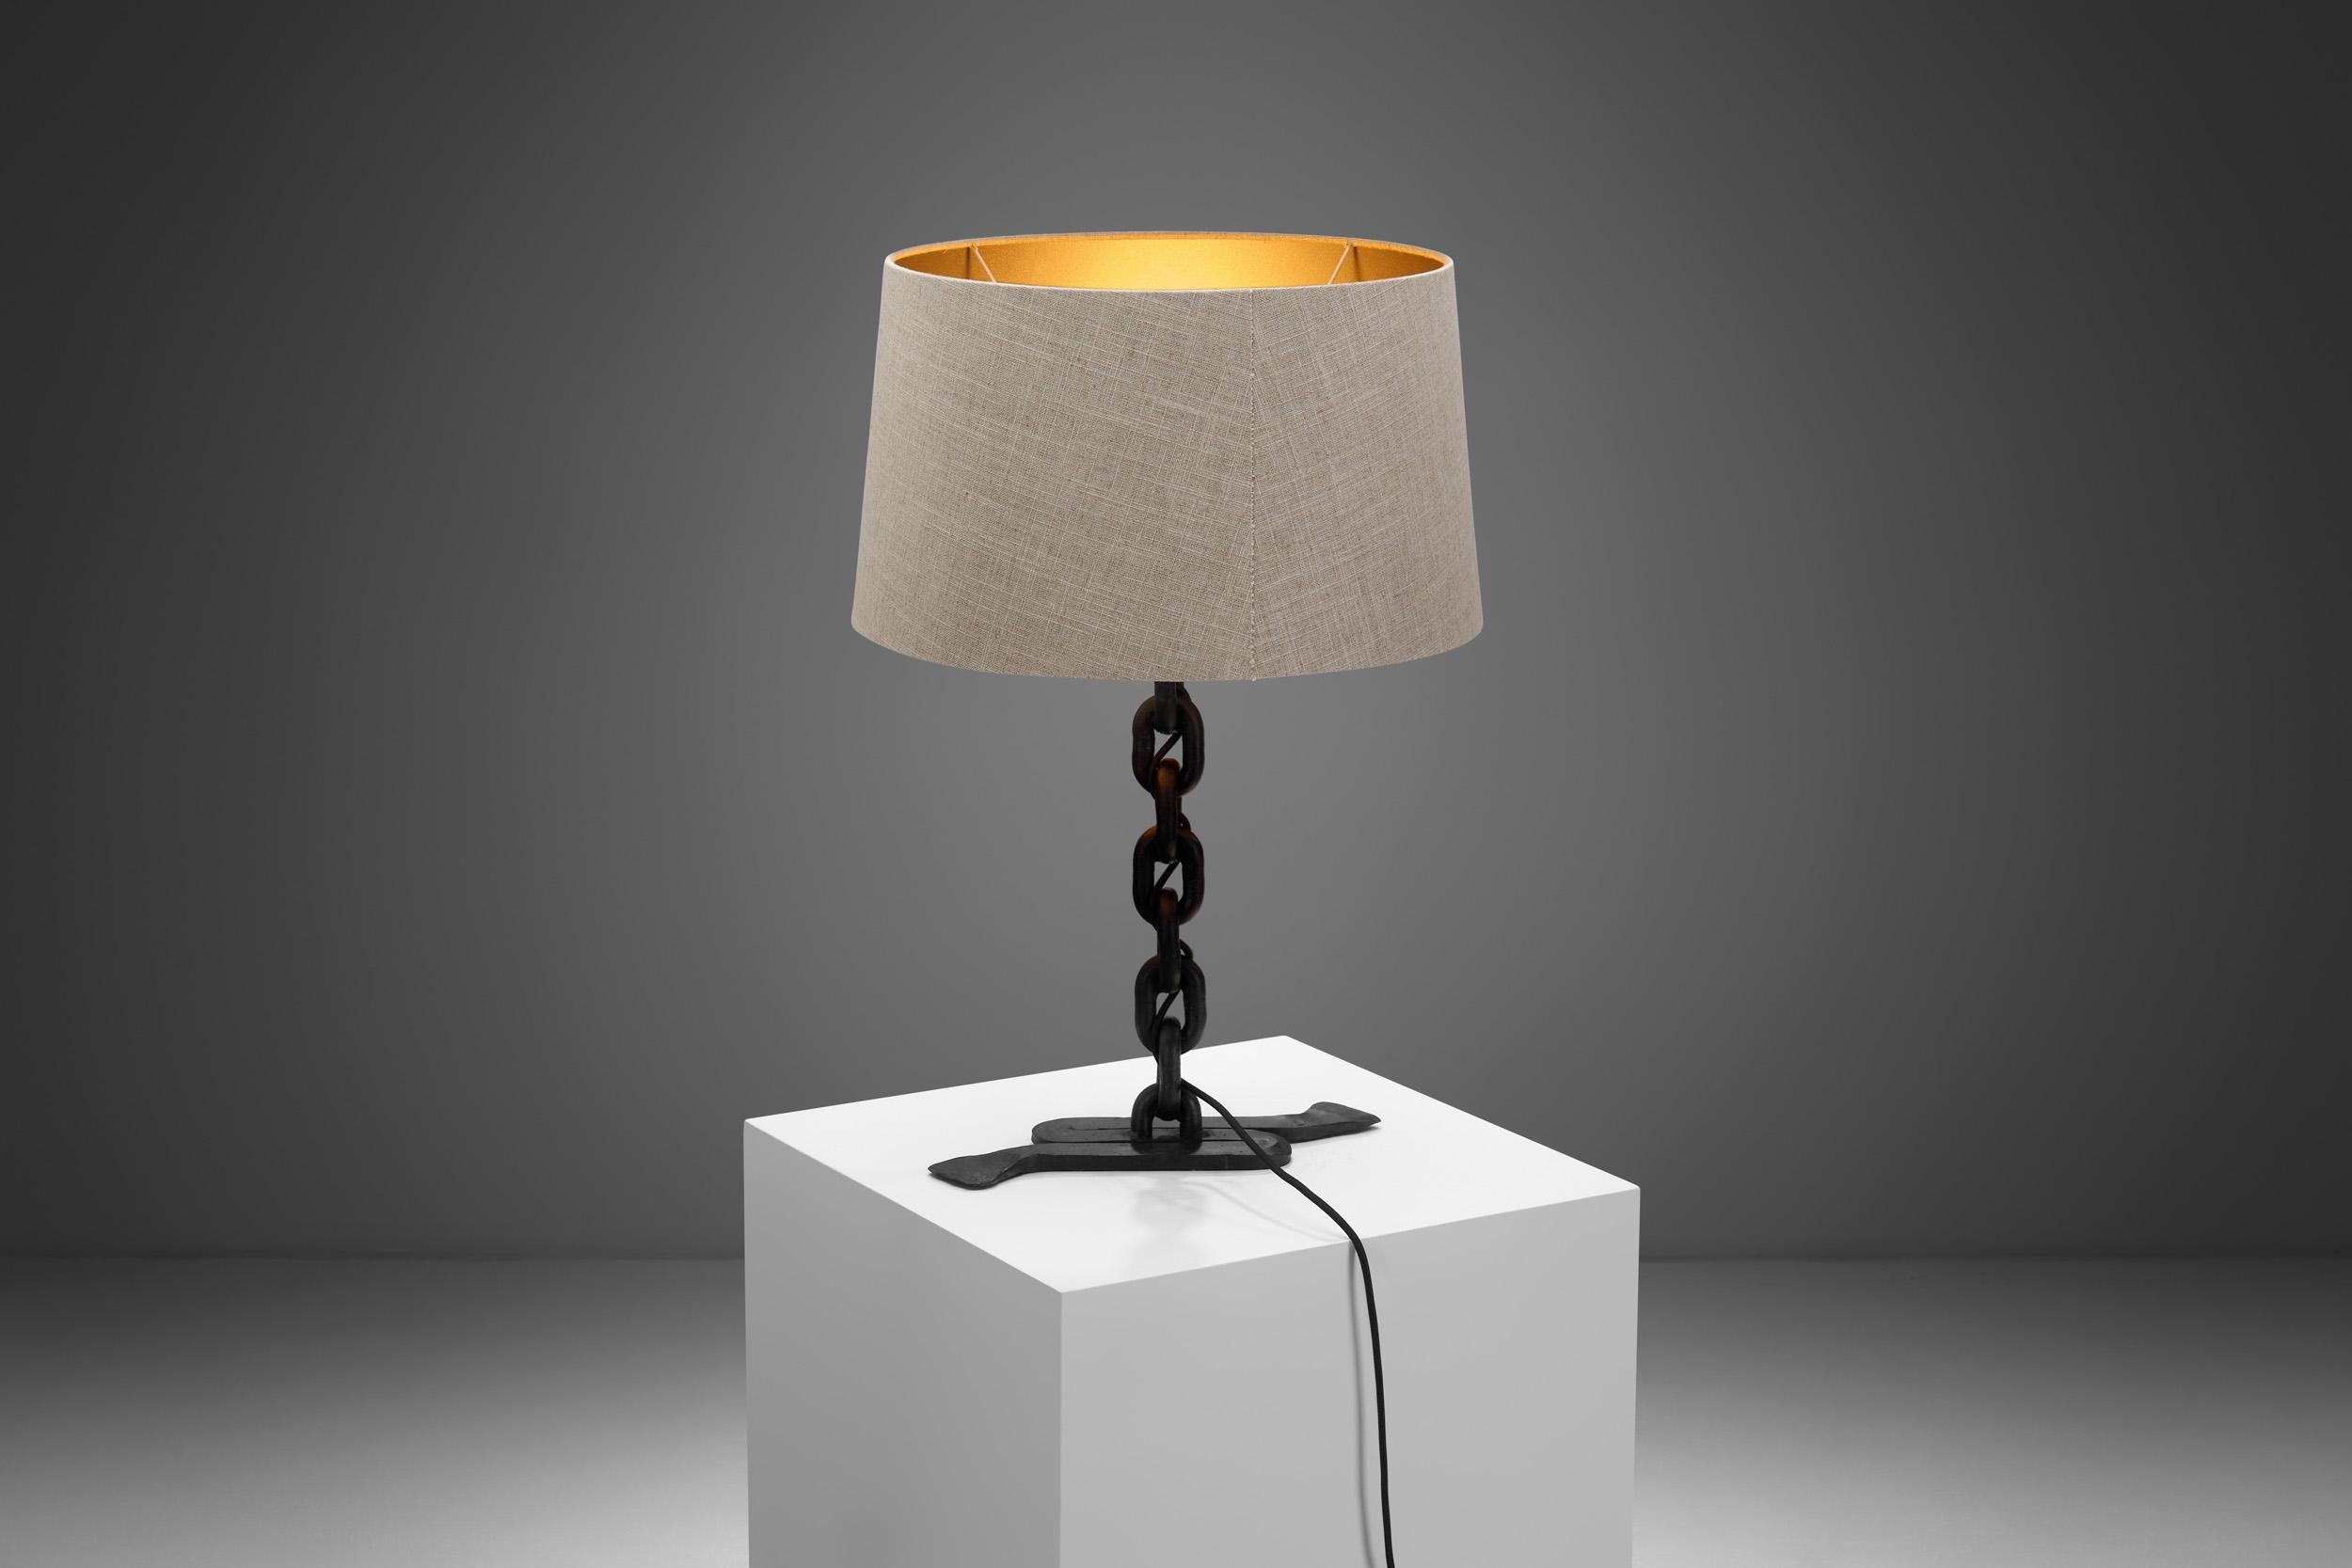 Fabric Wrought Iron Table Lamp with Chain Links, France 1960s For Sale